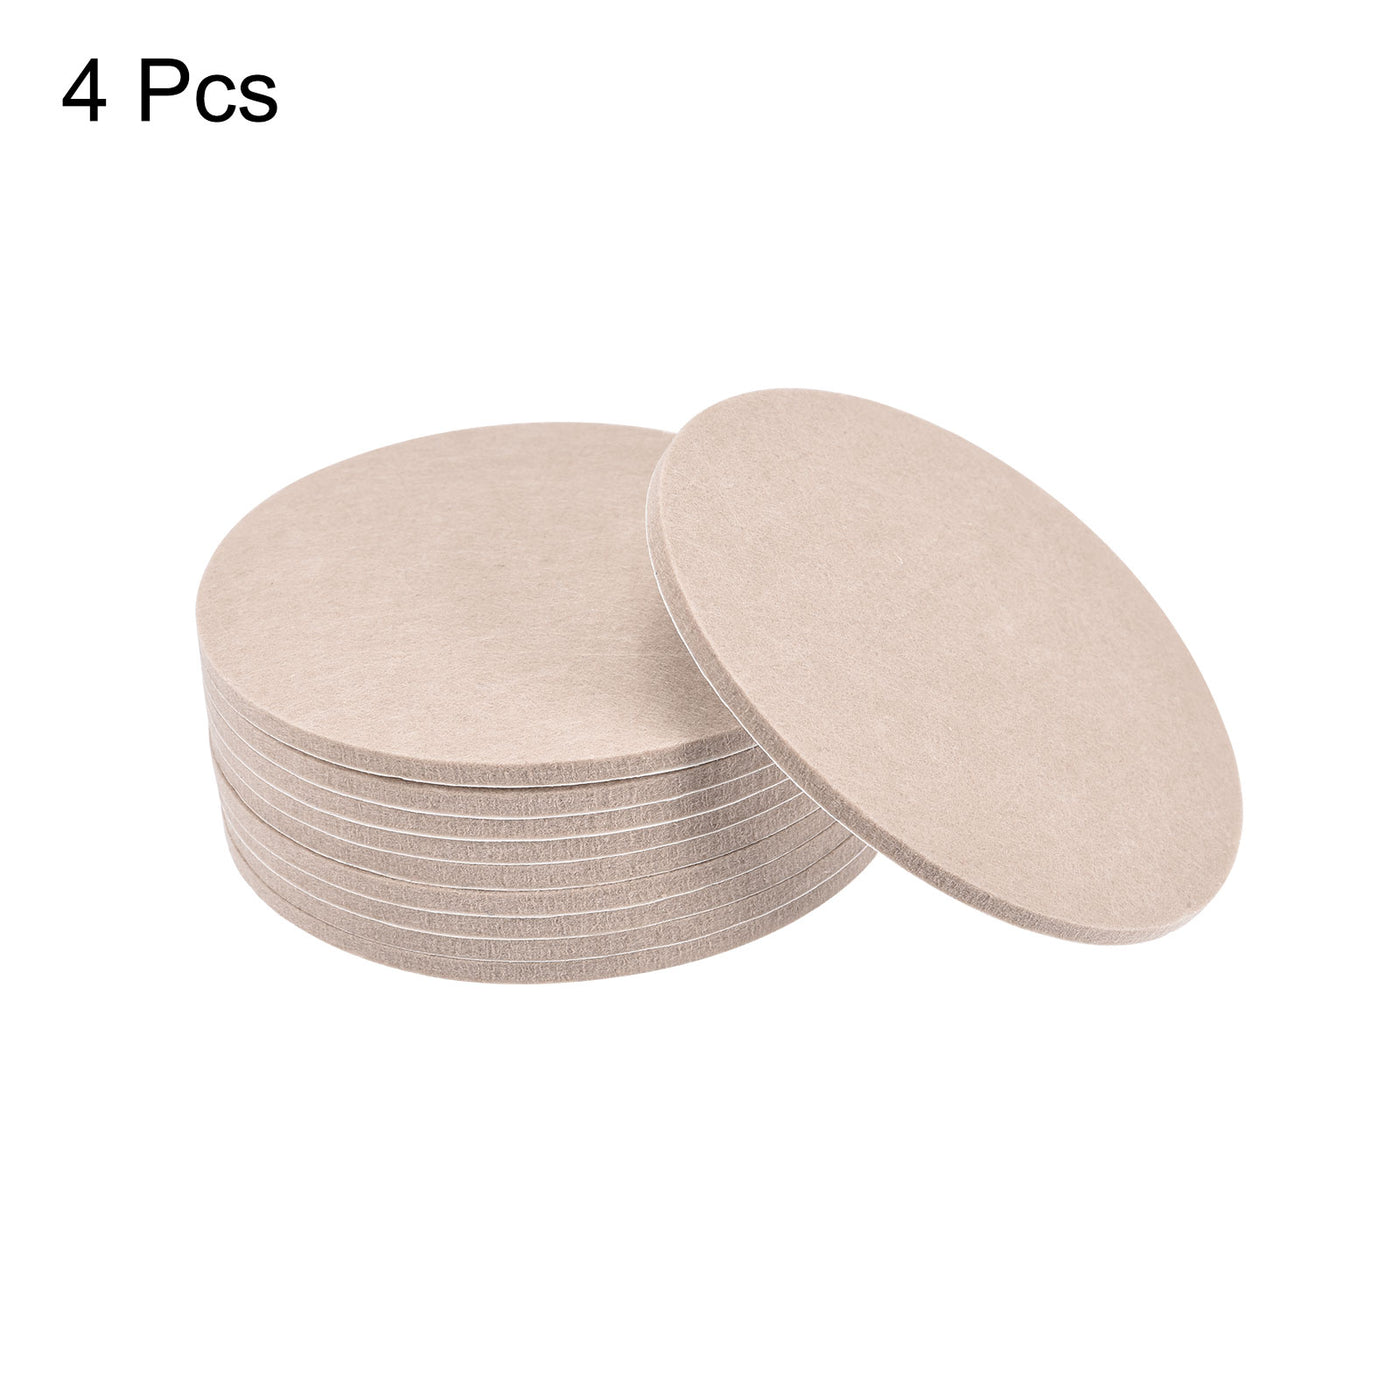 uxcell Uxcell Felt Furniture Pads, Self-stick Non-slip Anti-scratch Round Felt Pads for Furniture Feet and Other Home Furniture